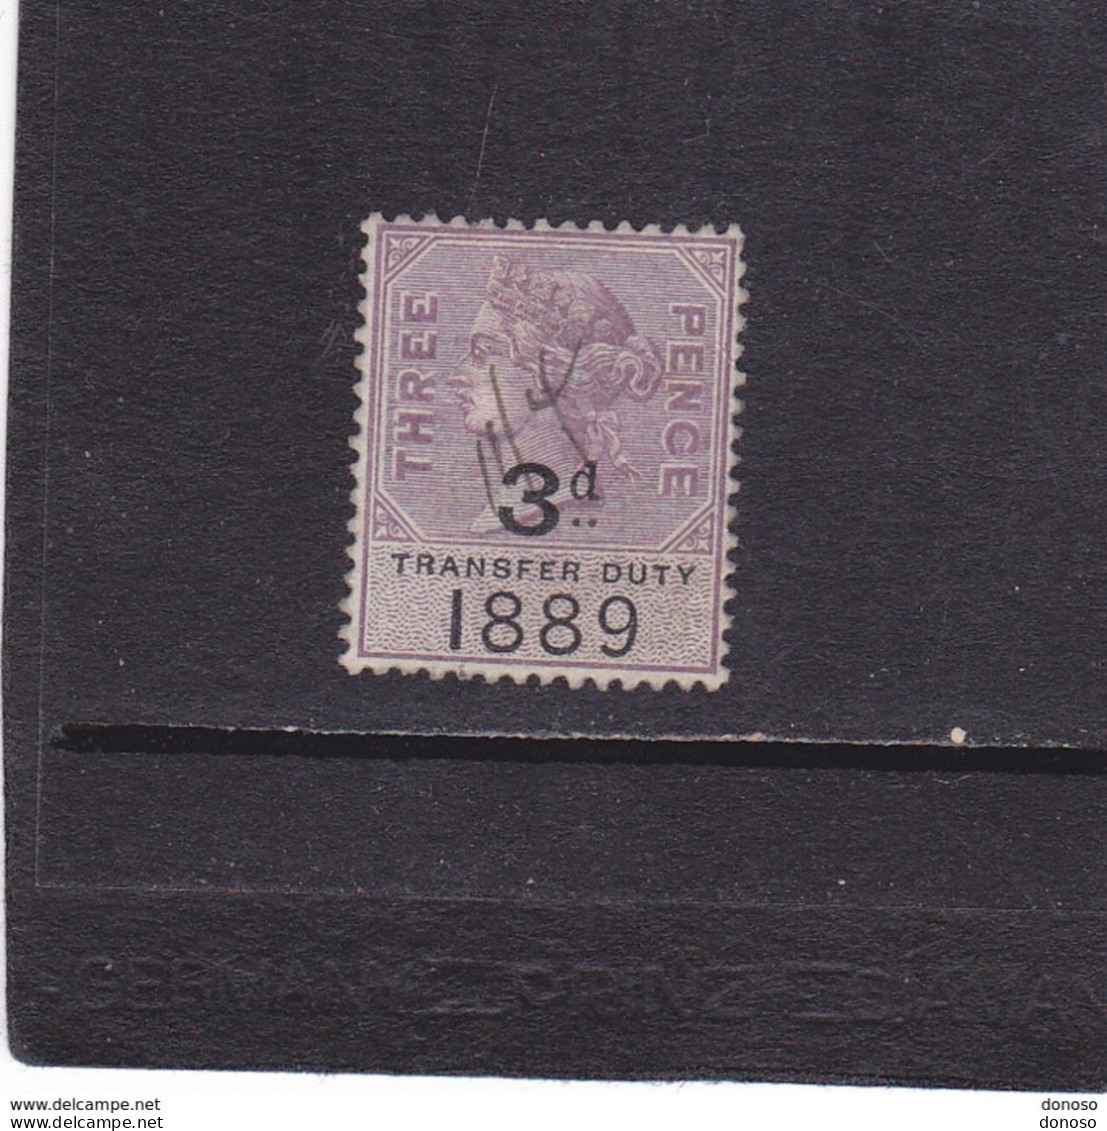 GB 1889 VICTORIA TIMBRE FISCAL TRANSFER DUTY Oblitéré, Used - Revenue Stamps